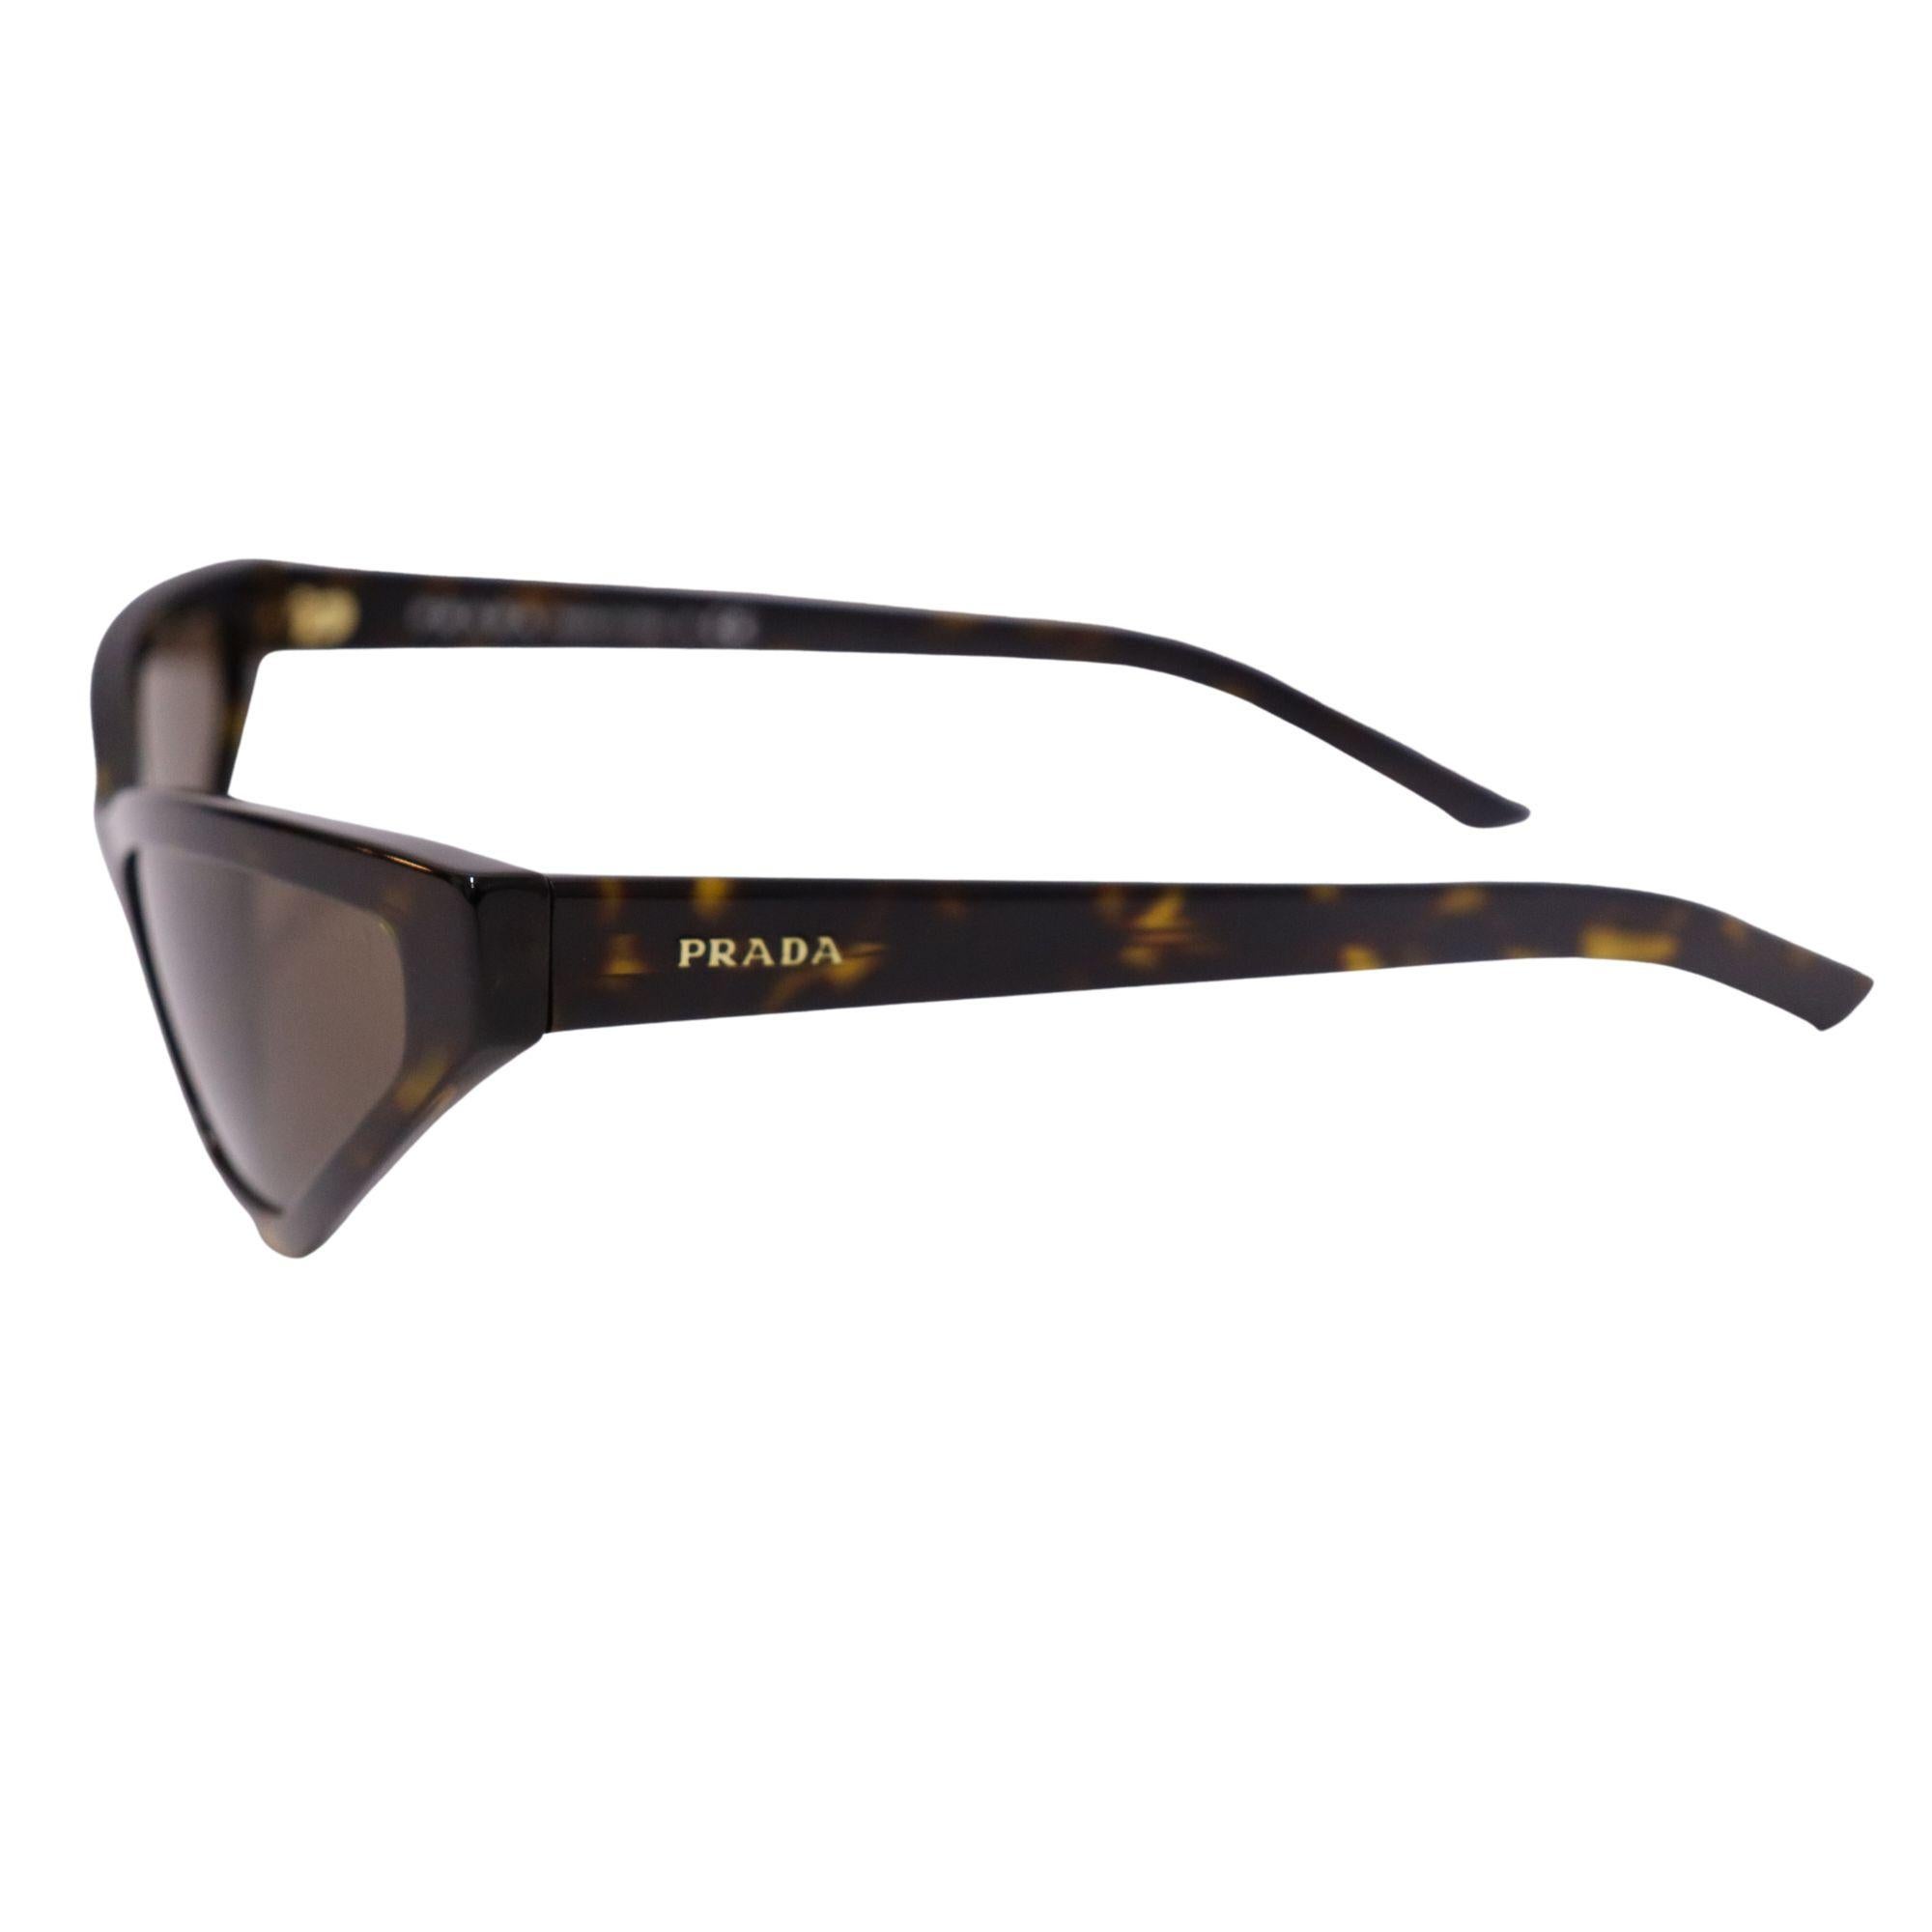 Prada Havana acetate-frame square cat-eye sunglasses. Featuring logo detailing to the arms.

Hardware: Acetate
Lens: Black
Size: 57/16/140

Condition
Overall Condition: Very Good

Extras
Includes original box